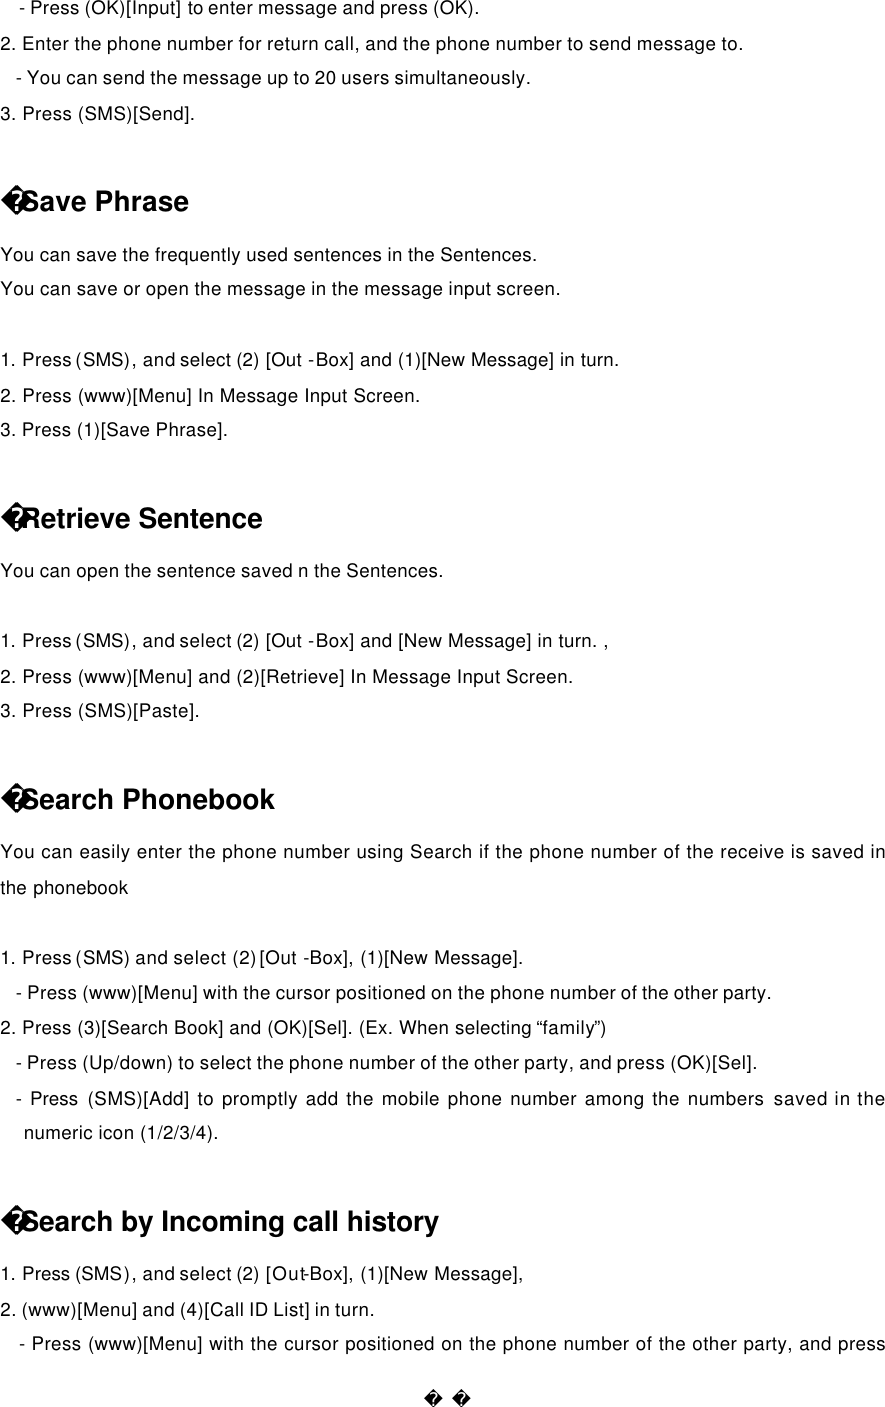  - Press (OK)[Input] to enter message and press (OK). 2. Enter the phone number for return call, and the phone number to send message to. - You can send the message up to 20 users simultaneously. 3. Press (SMS)[Send].  Save Phrase You can save the frequently used sentences in the Sentences. You can save or open the message in the message input screen.  1. Press (SMS), and select (2) [Out  -Box] and (1)[New Message] in turn.   2. Press (www)[Menu] In Message Input Screen. 3. Press (1)[Save Phrase].  Retrieve Sentence You can open the sentence saved n the Sentences.  1. Press (SMS), and select (2) [Out  -Box] and [New Message] in turn. , 2. Press (www)[Menu] and (2)[Retrieve] In Message Input Screen. 3. Press (SMS)[Paste].  Search Phonebook You can easily enter the phone number using Search if the phone number of the receive is saved in the phonebook  1. Press (SMS) and select (2) [Out -Box], (1)[New Message]. - Press (www)[Menu] with the cursor positioned on the phone number of the other party. 2. Press (3)[Search Book] and (OK)[Sel]. (Ex. When selecting “family”) - Press (Up/down) to select the phone number of the other party, and press (OK)[Sel]. - Press (SMS)[Add] to promptly add the mobile phone number among the numbers saved in the numeric icon (1/2/3/4).  Search by Incoming call history 1. Press (SMS), and select (2) [Out-Box], (1)[New Message],   2. (www)[Menu] and (4)[Call ID List] in turn. - Press (www)[Menu] with the cursor positioned on the phone number of the other party, and press 